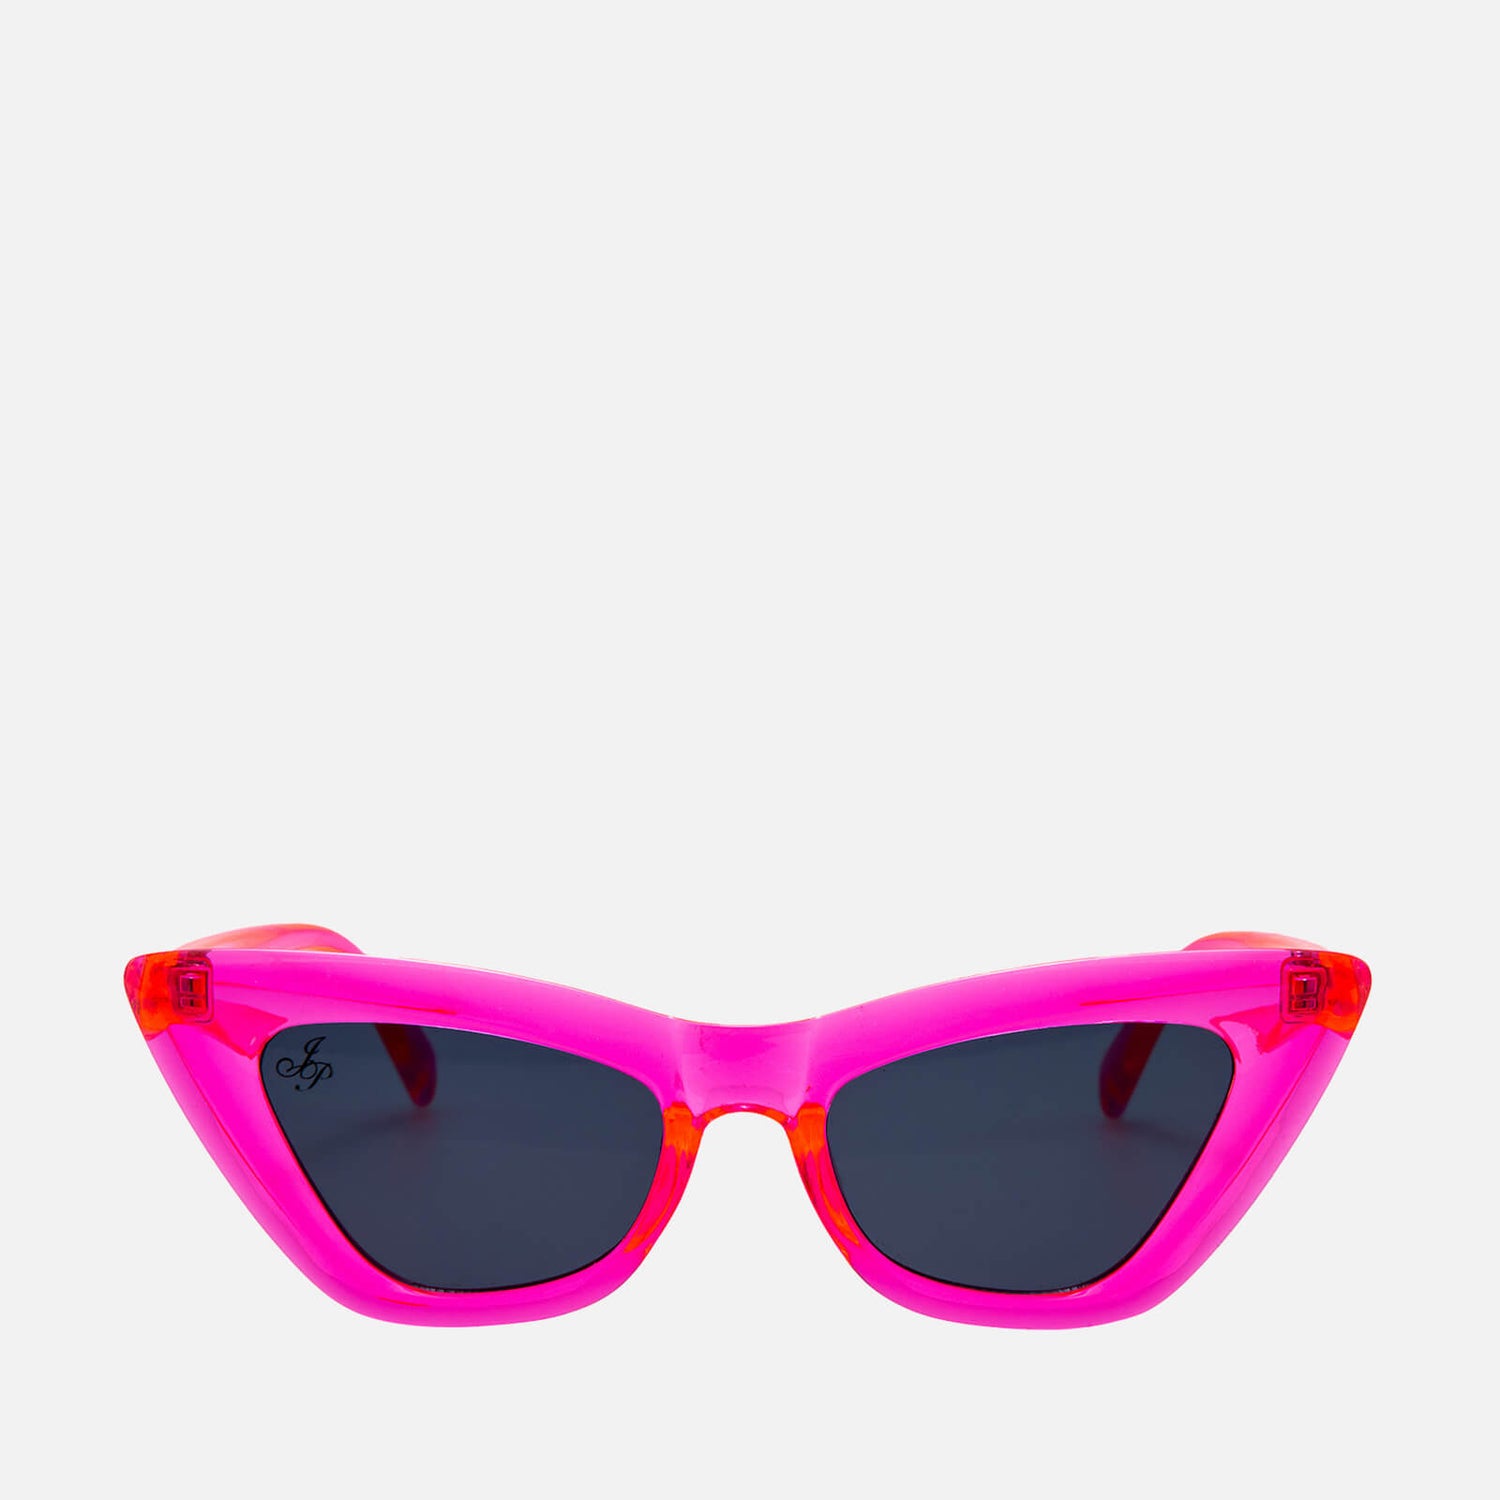 Jeepers Peepers Cat Eye Acetate Sunglasses